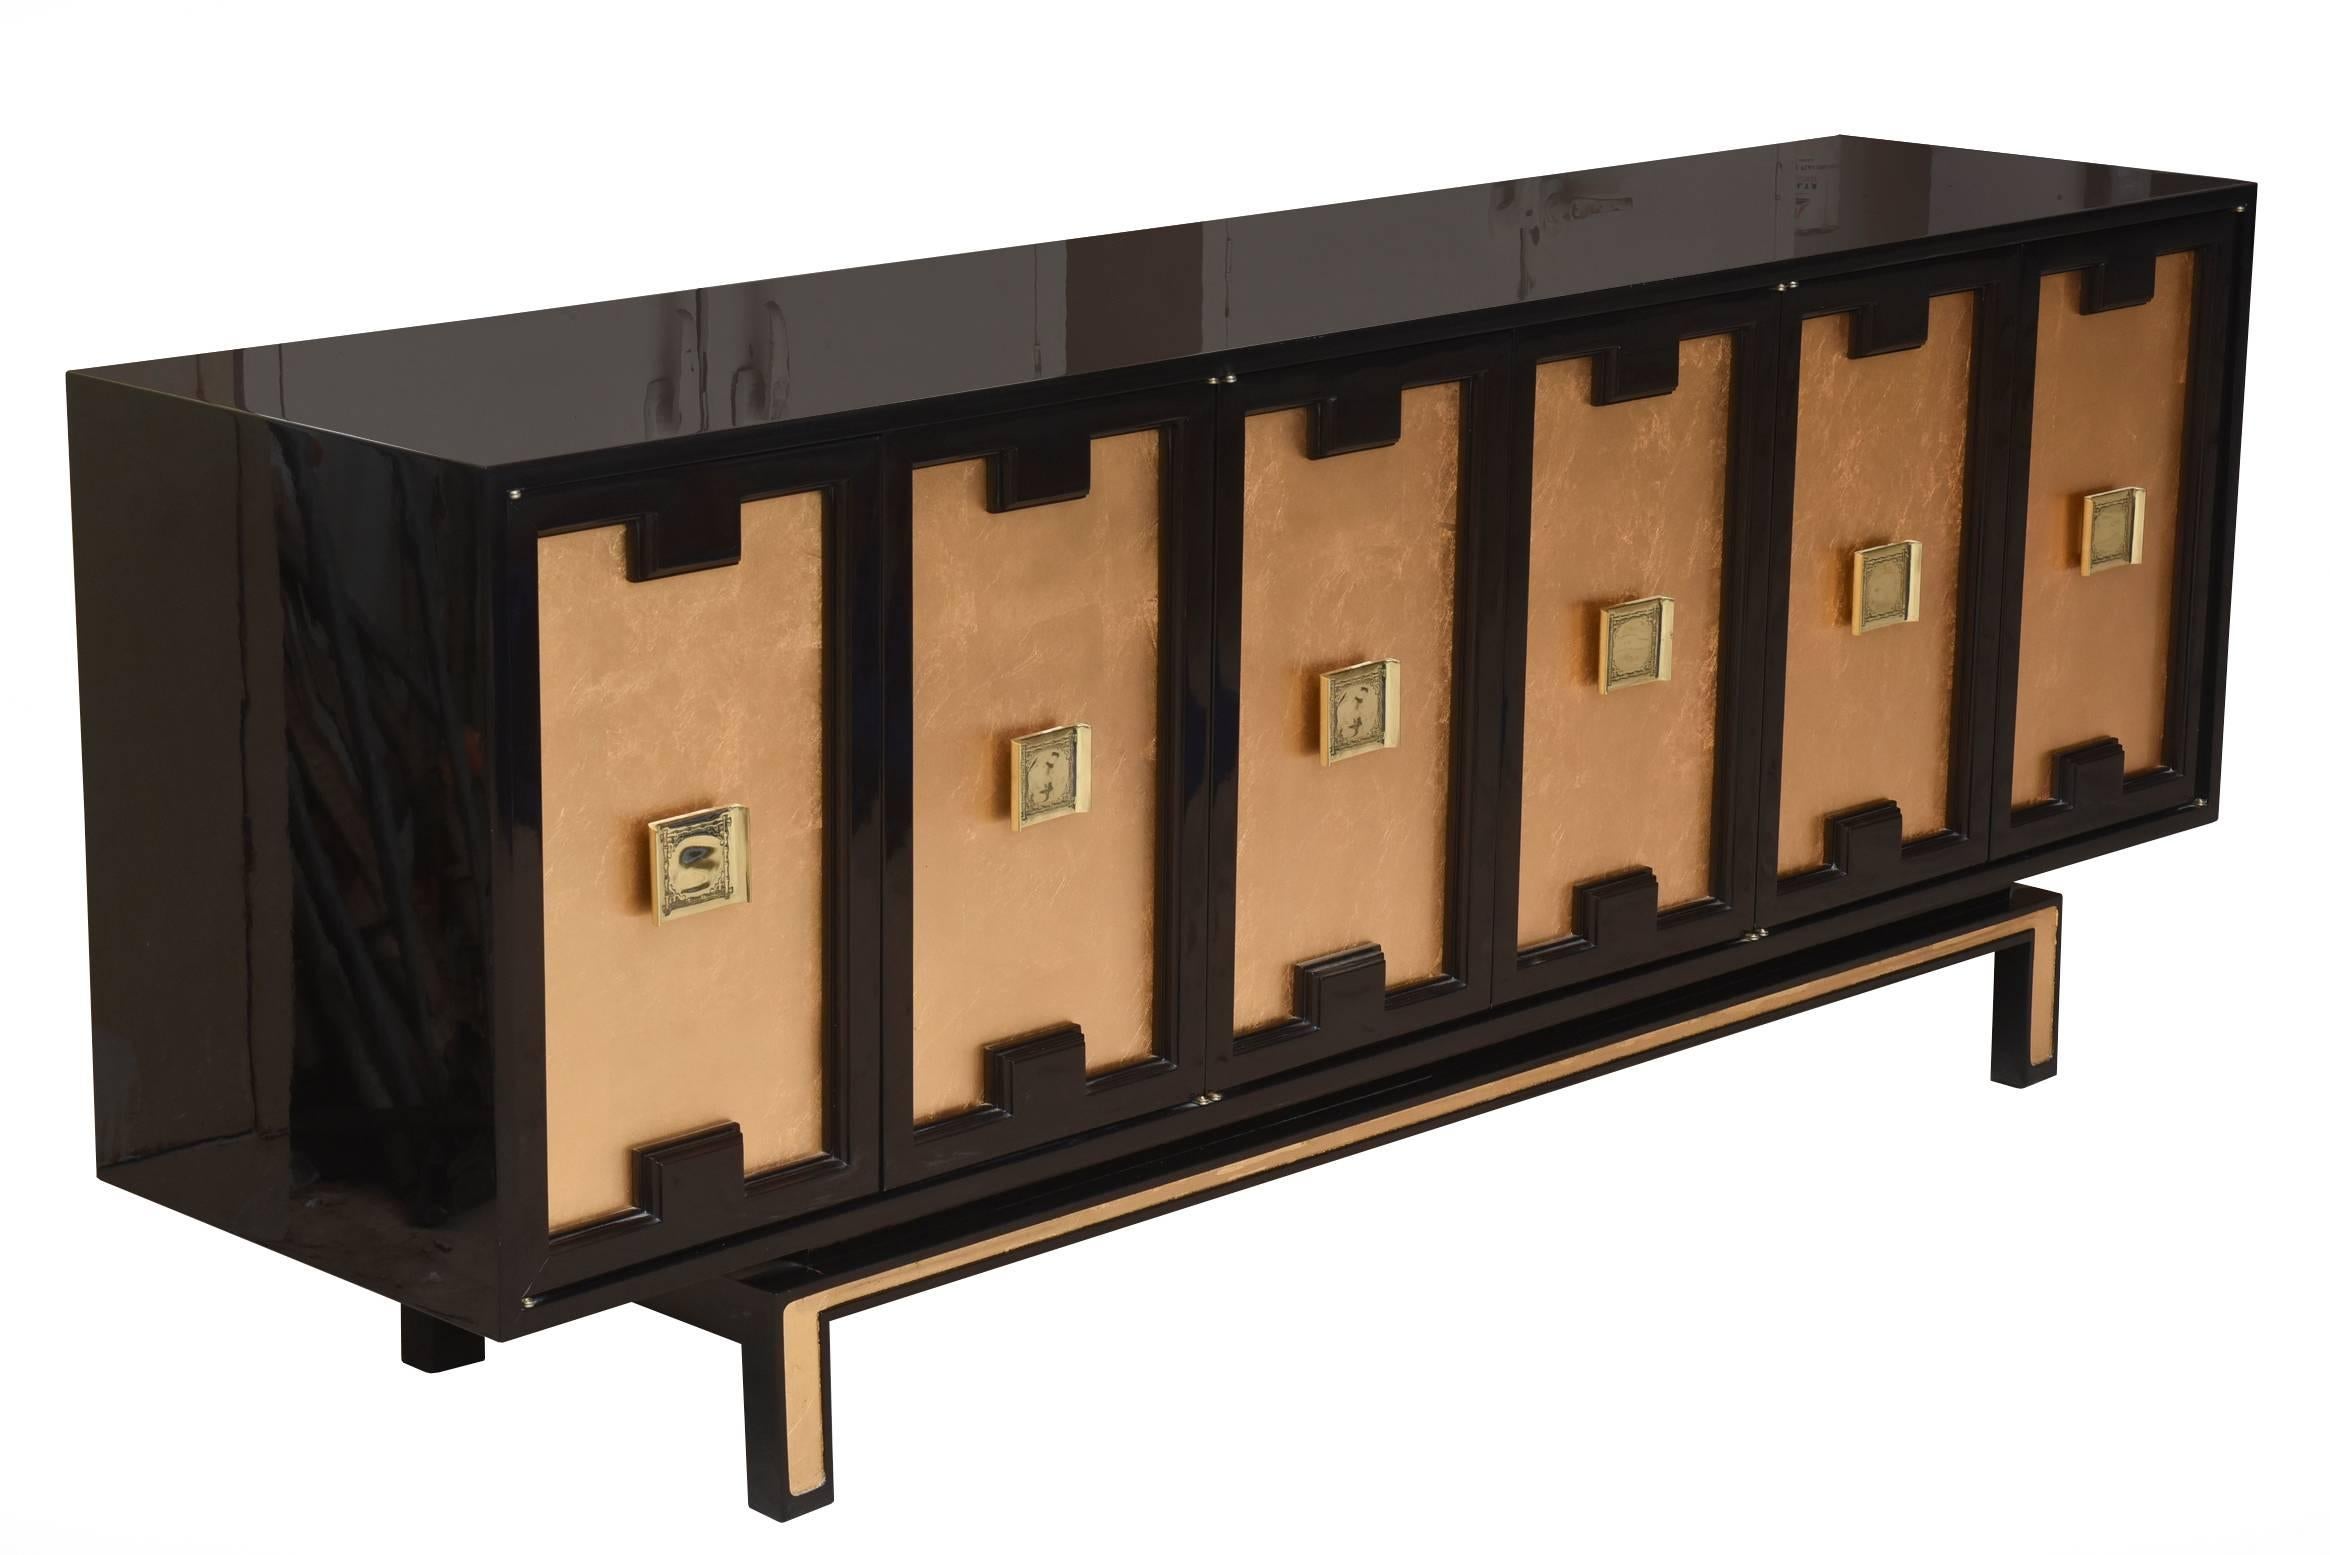 This restored lacquered wood with gold leaf and brass hardware cabinet, credenza or buffet vintage cabinet is dramatic. It is stunning and newly restored vintage 1960s cabinet or buffet that has been brought to the 21st century. It is regal and rich